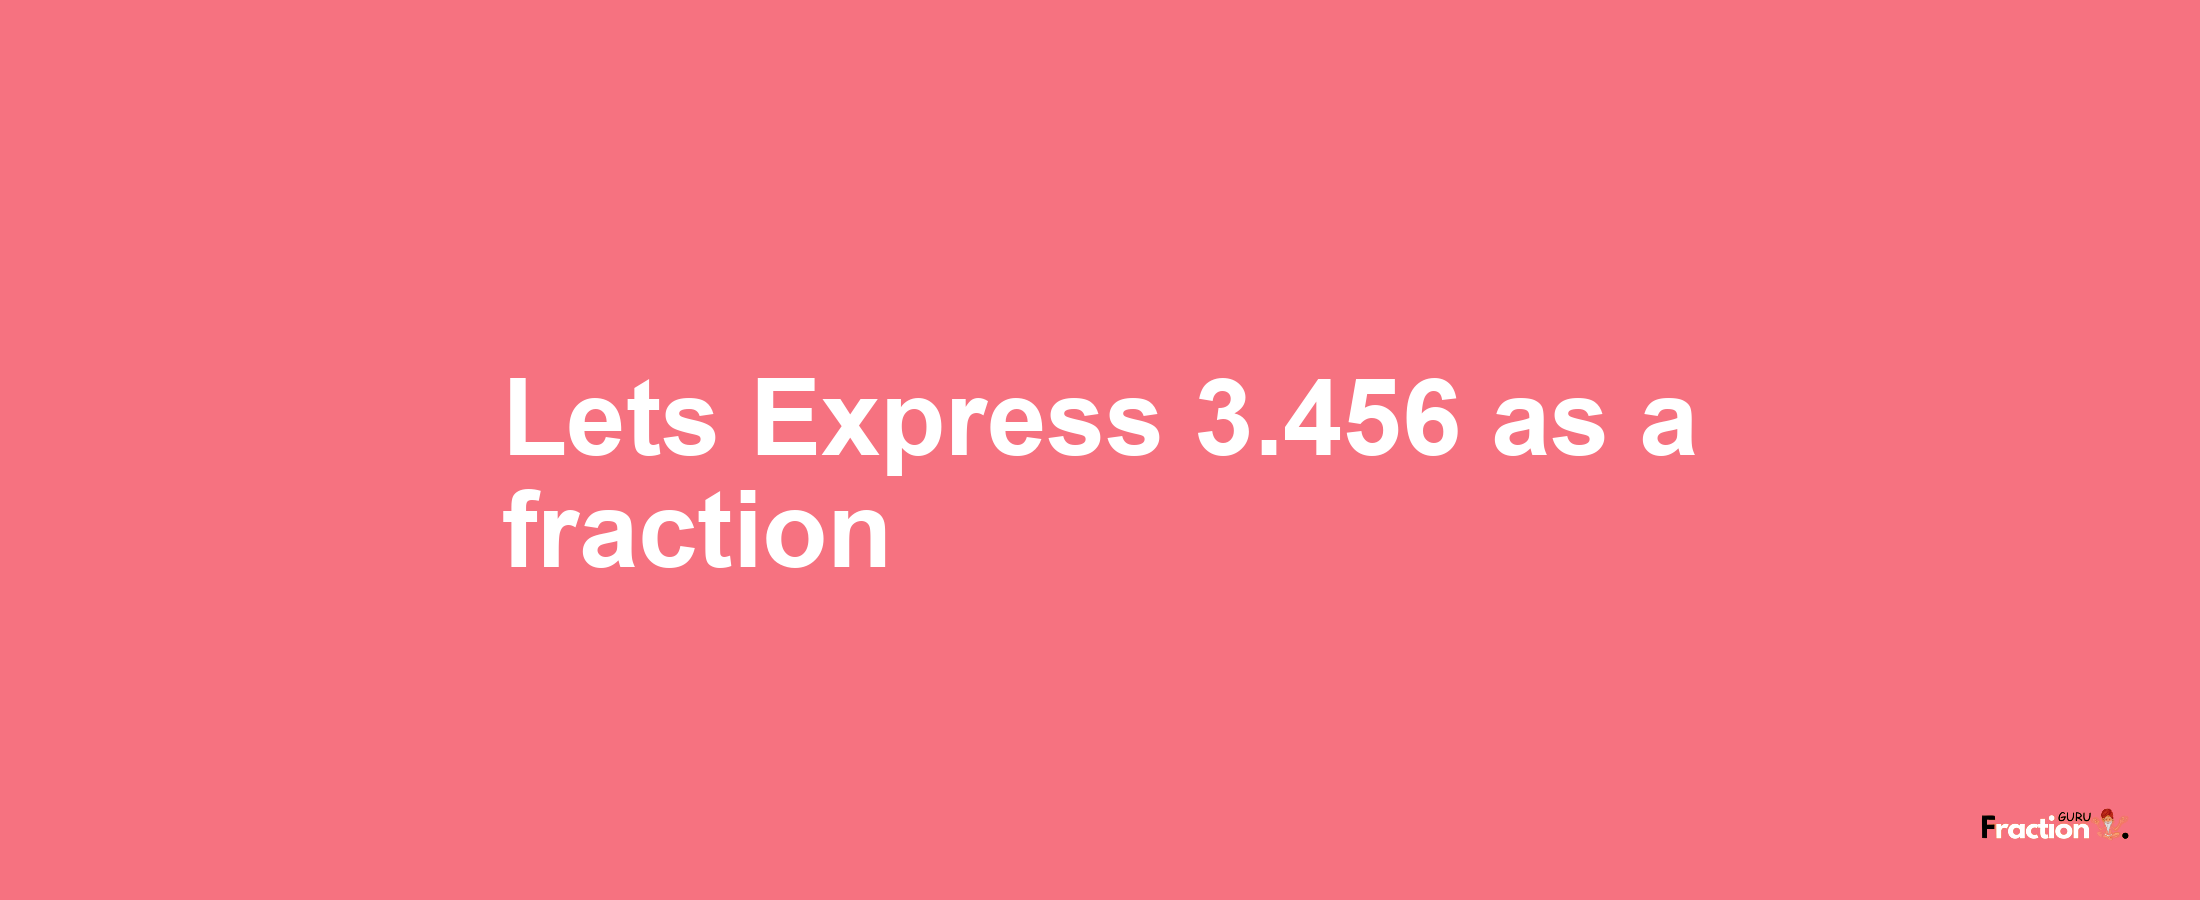 Lets Express 3.456 as afraction